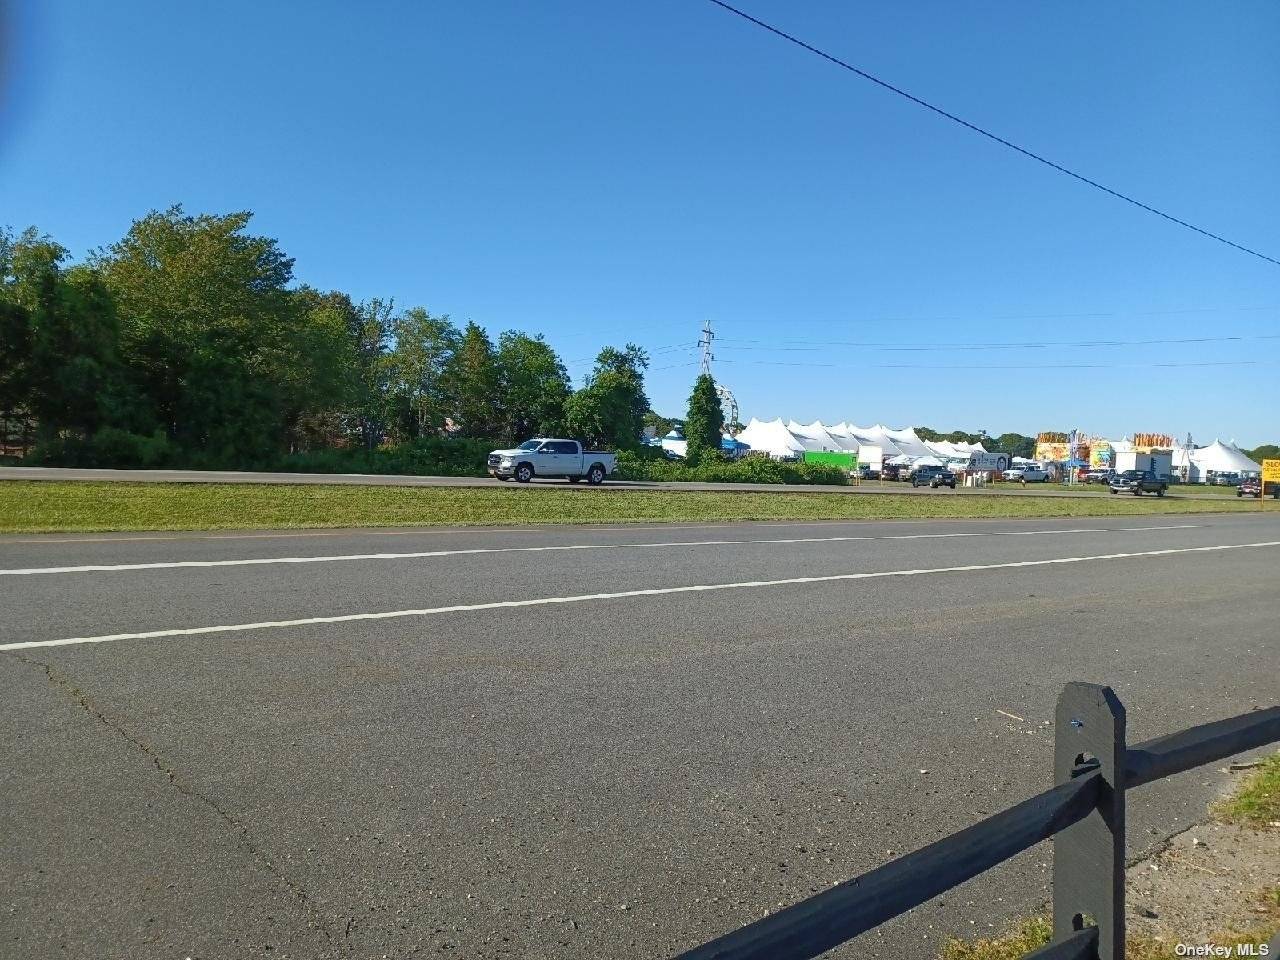 Prime Limited Business Parcel on Route 48 near traffic light to Sound Ave.